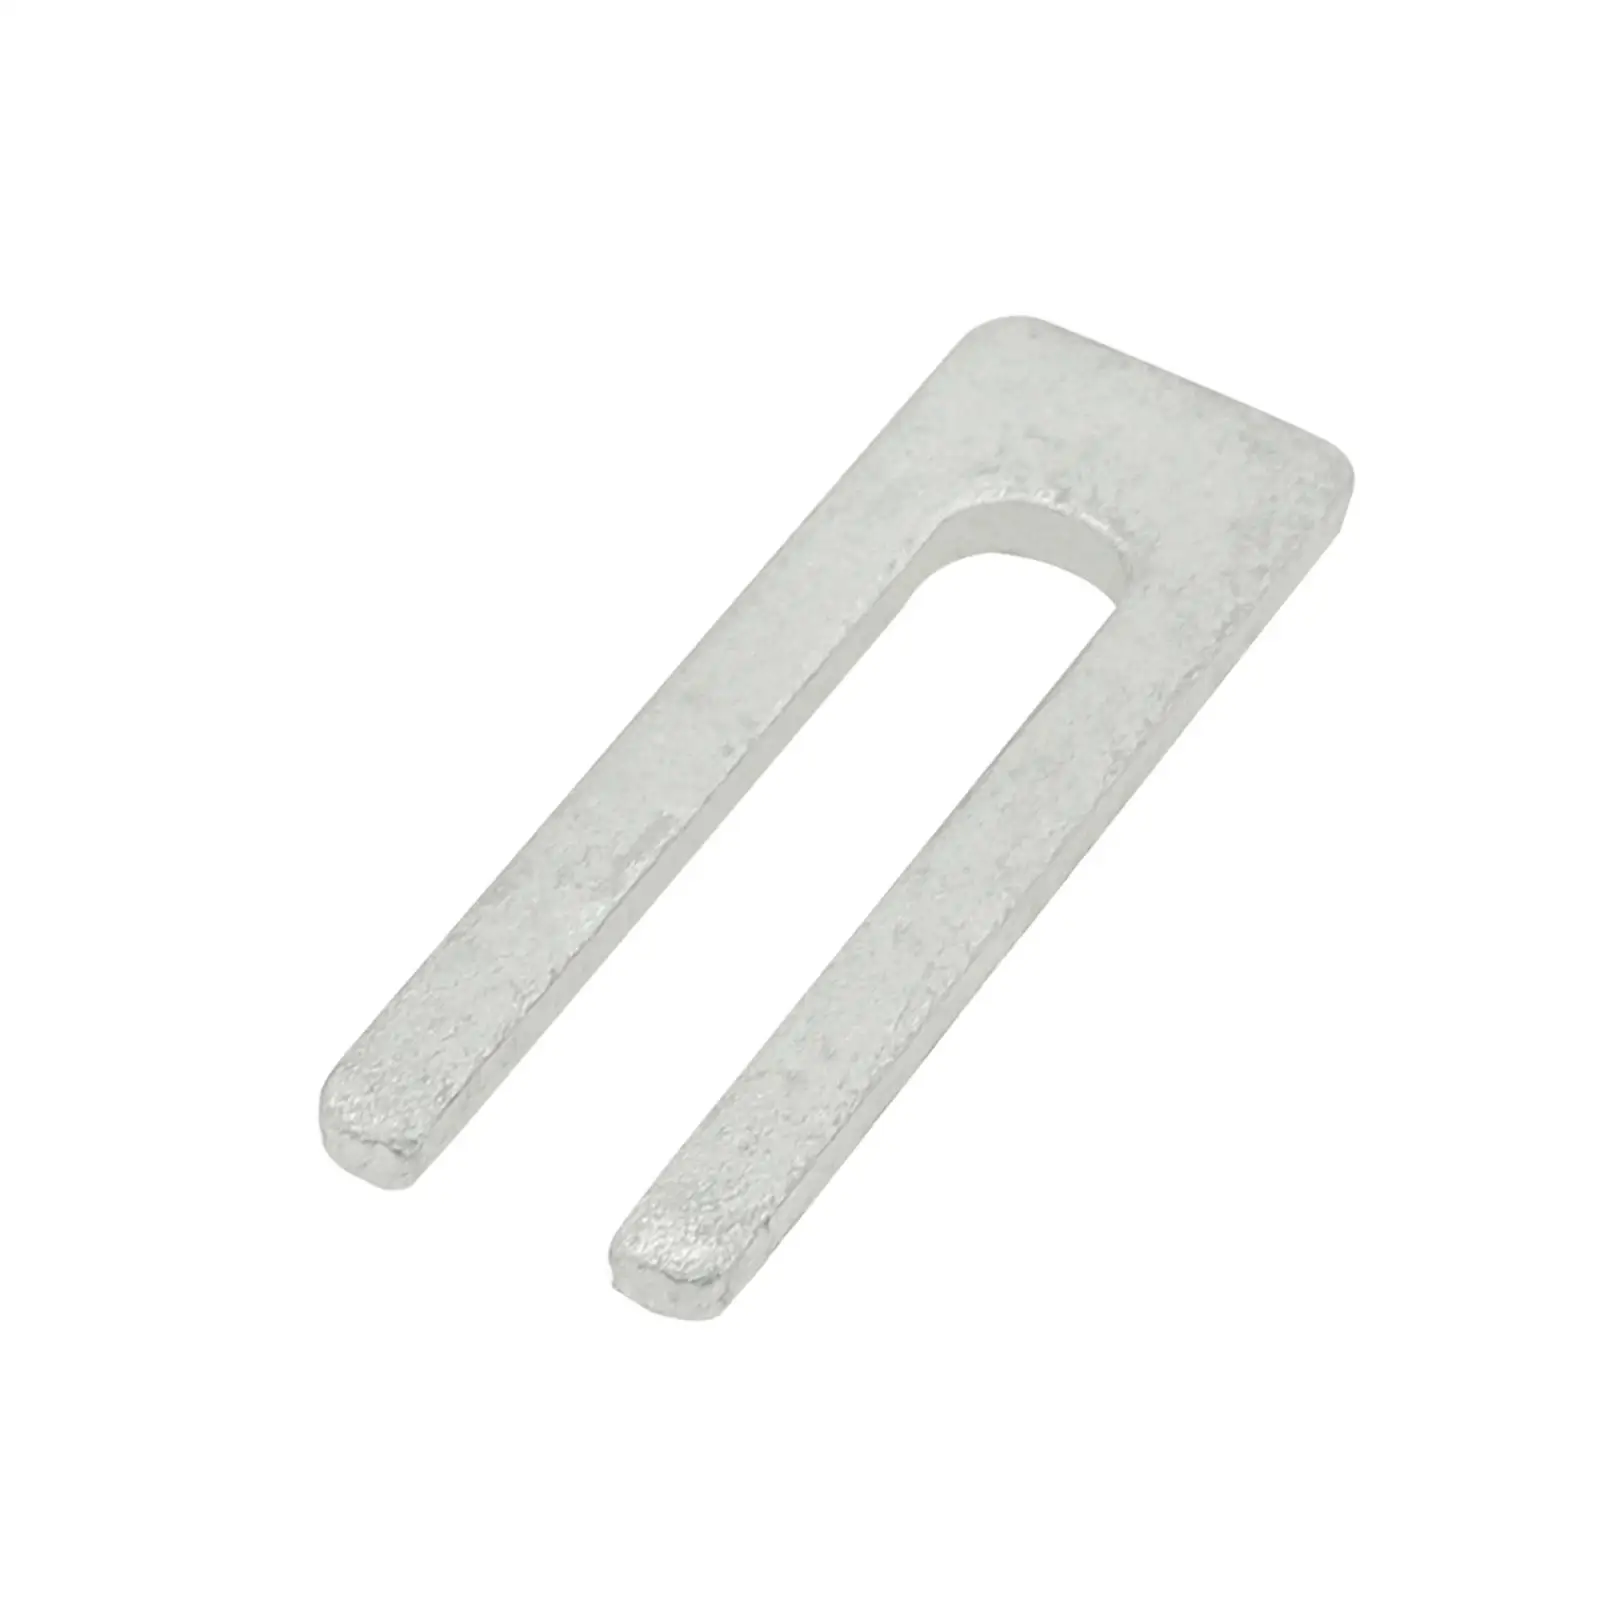 6H3-48538-00 Cable Clamp Replacement Durable High Performance